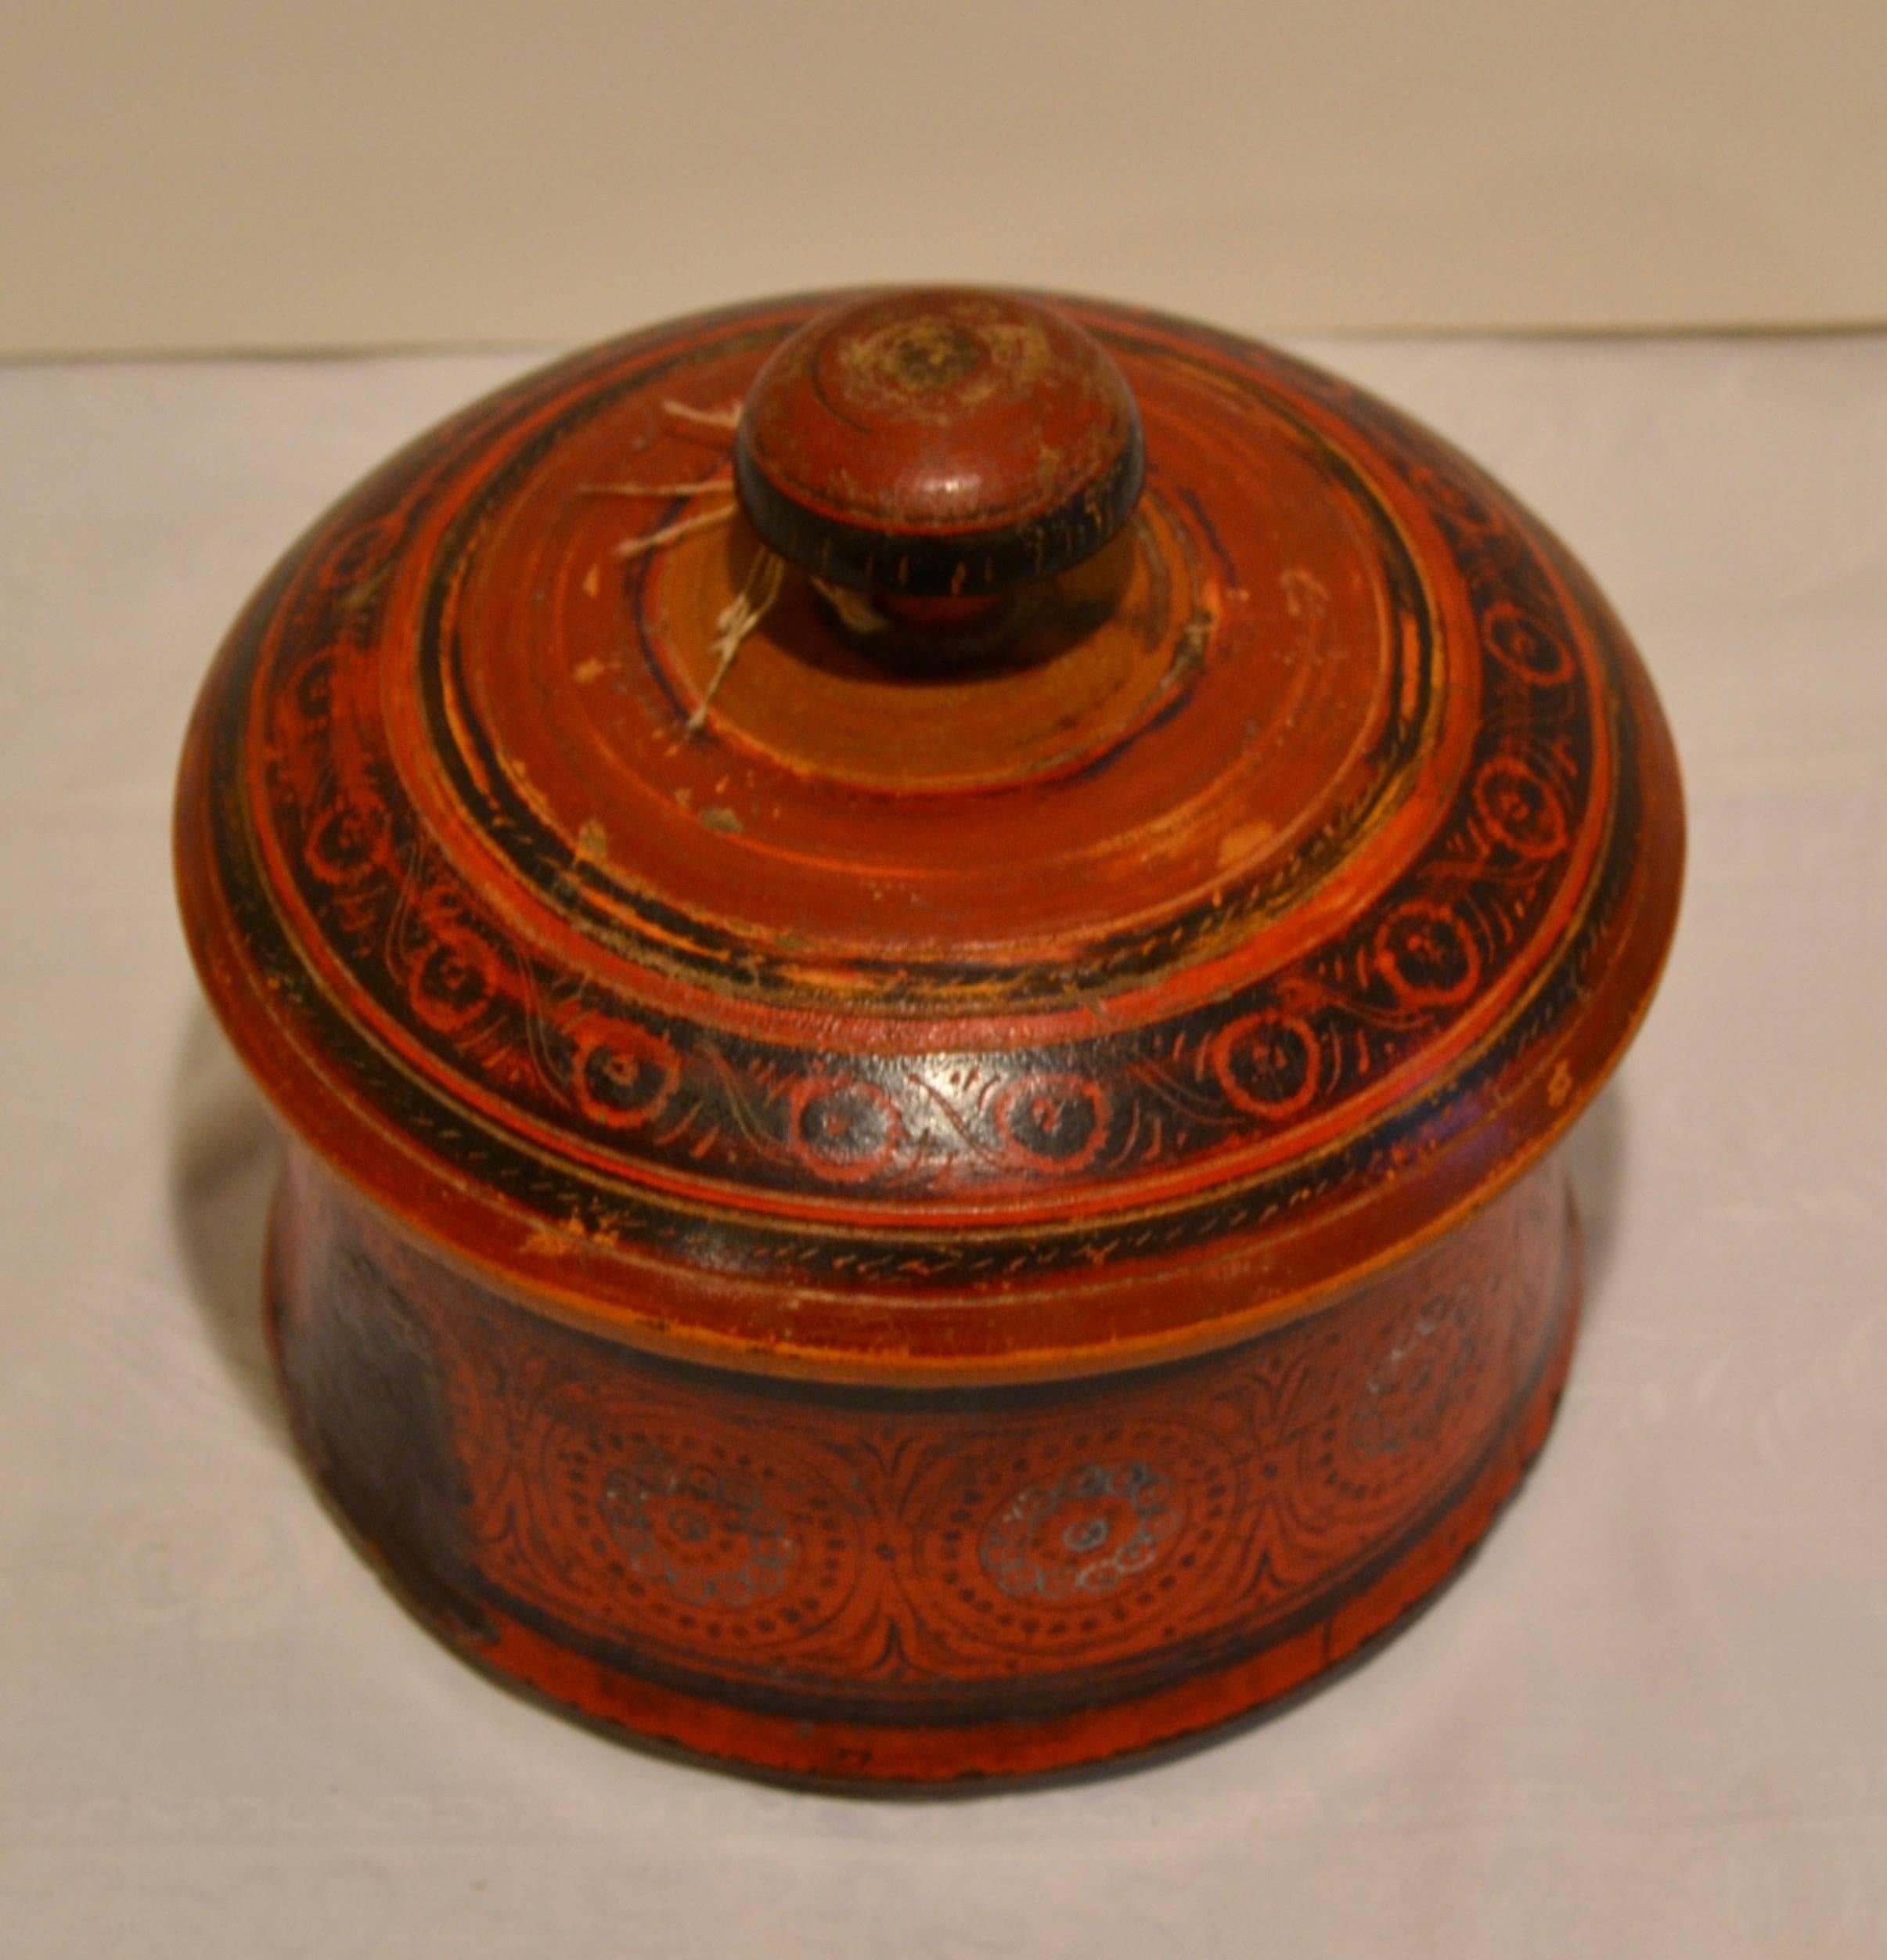 This is a delightful medium-size hand-turned, incised and hand-painted antique tribal wooden spice box from Pakistan, with a red and black pattern of concentric circles and wheels. Its multiple chips, scrapes, and dings, and one significant candle